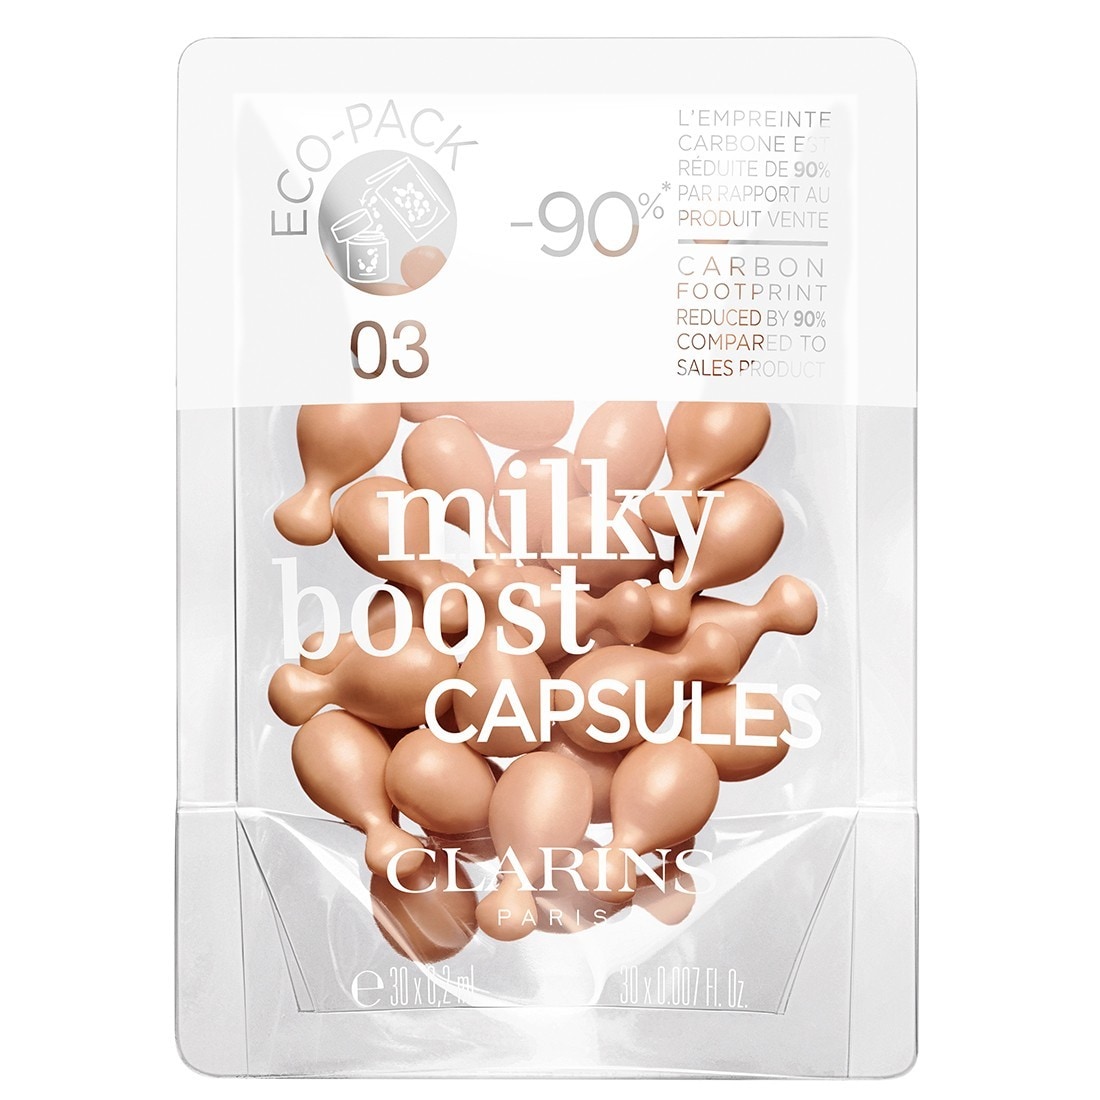 Clarins Milky Boost Capsules Refill, 03